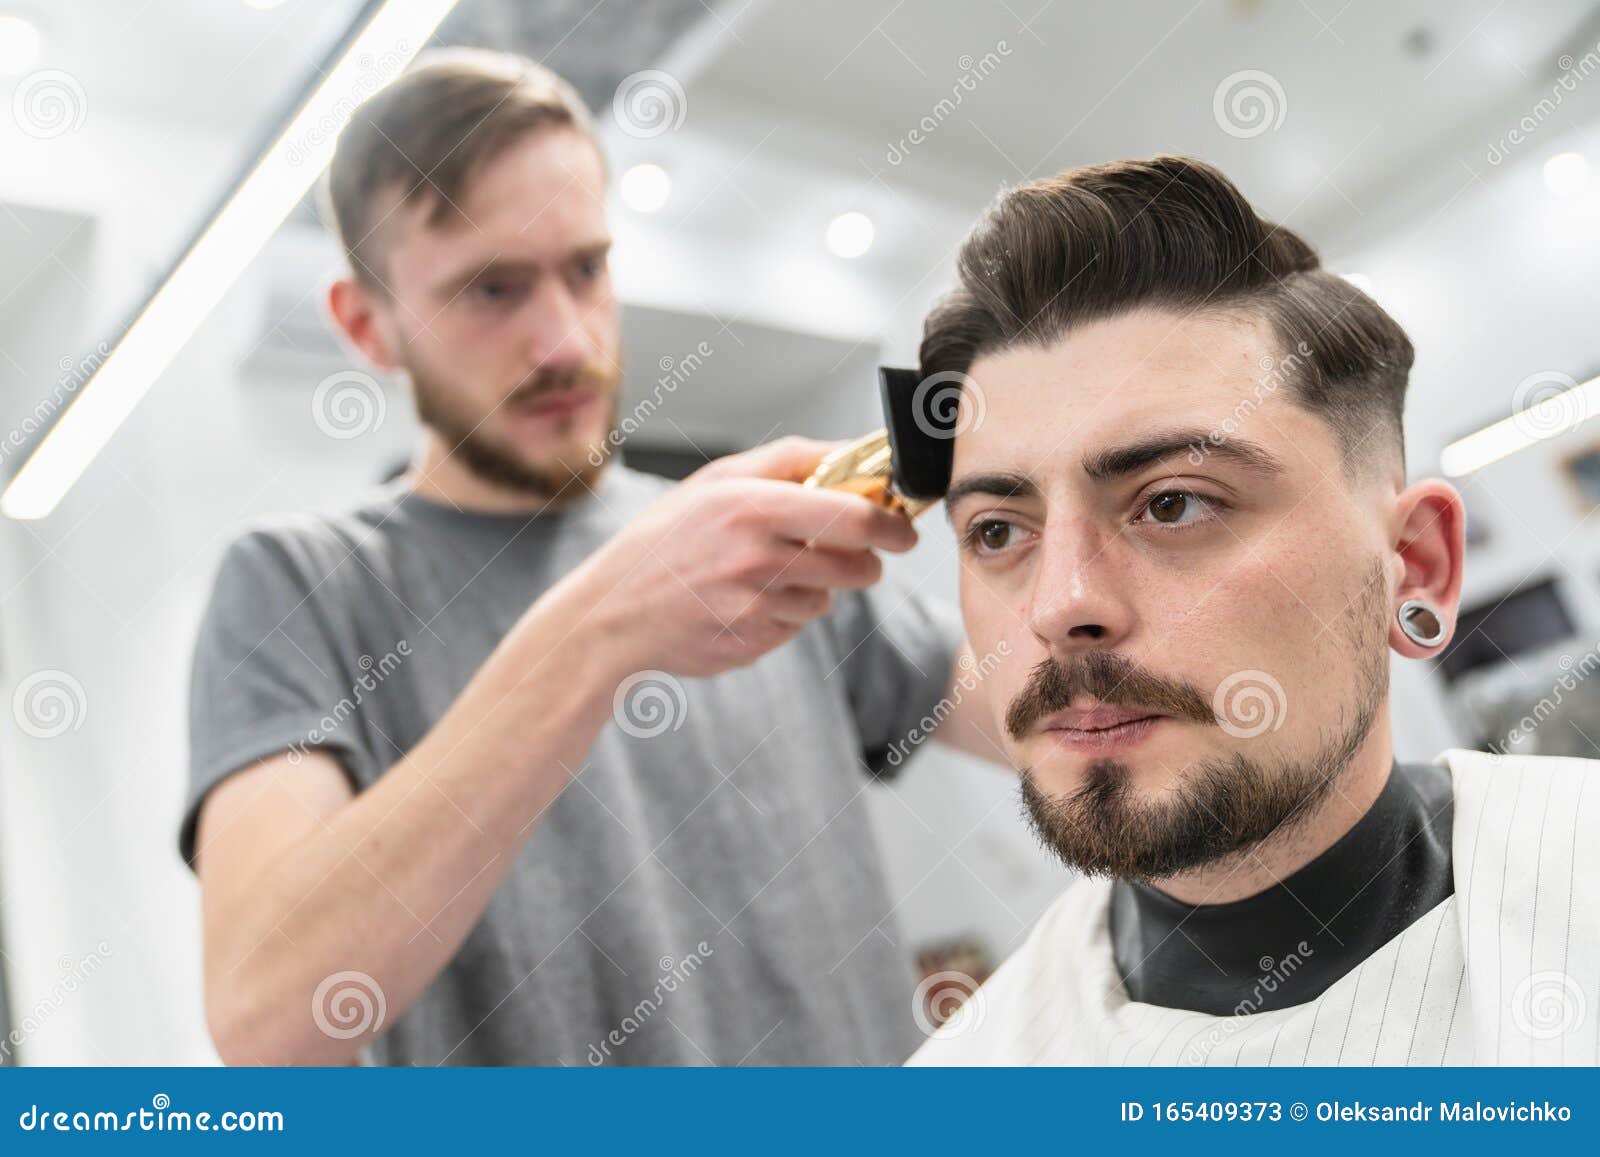 Haircut in a Hairdresser. New Haircut Style. Stock Image - Image of modern,  hairstyle: 165409373